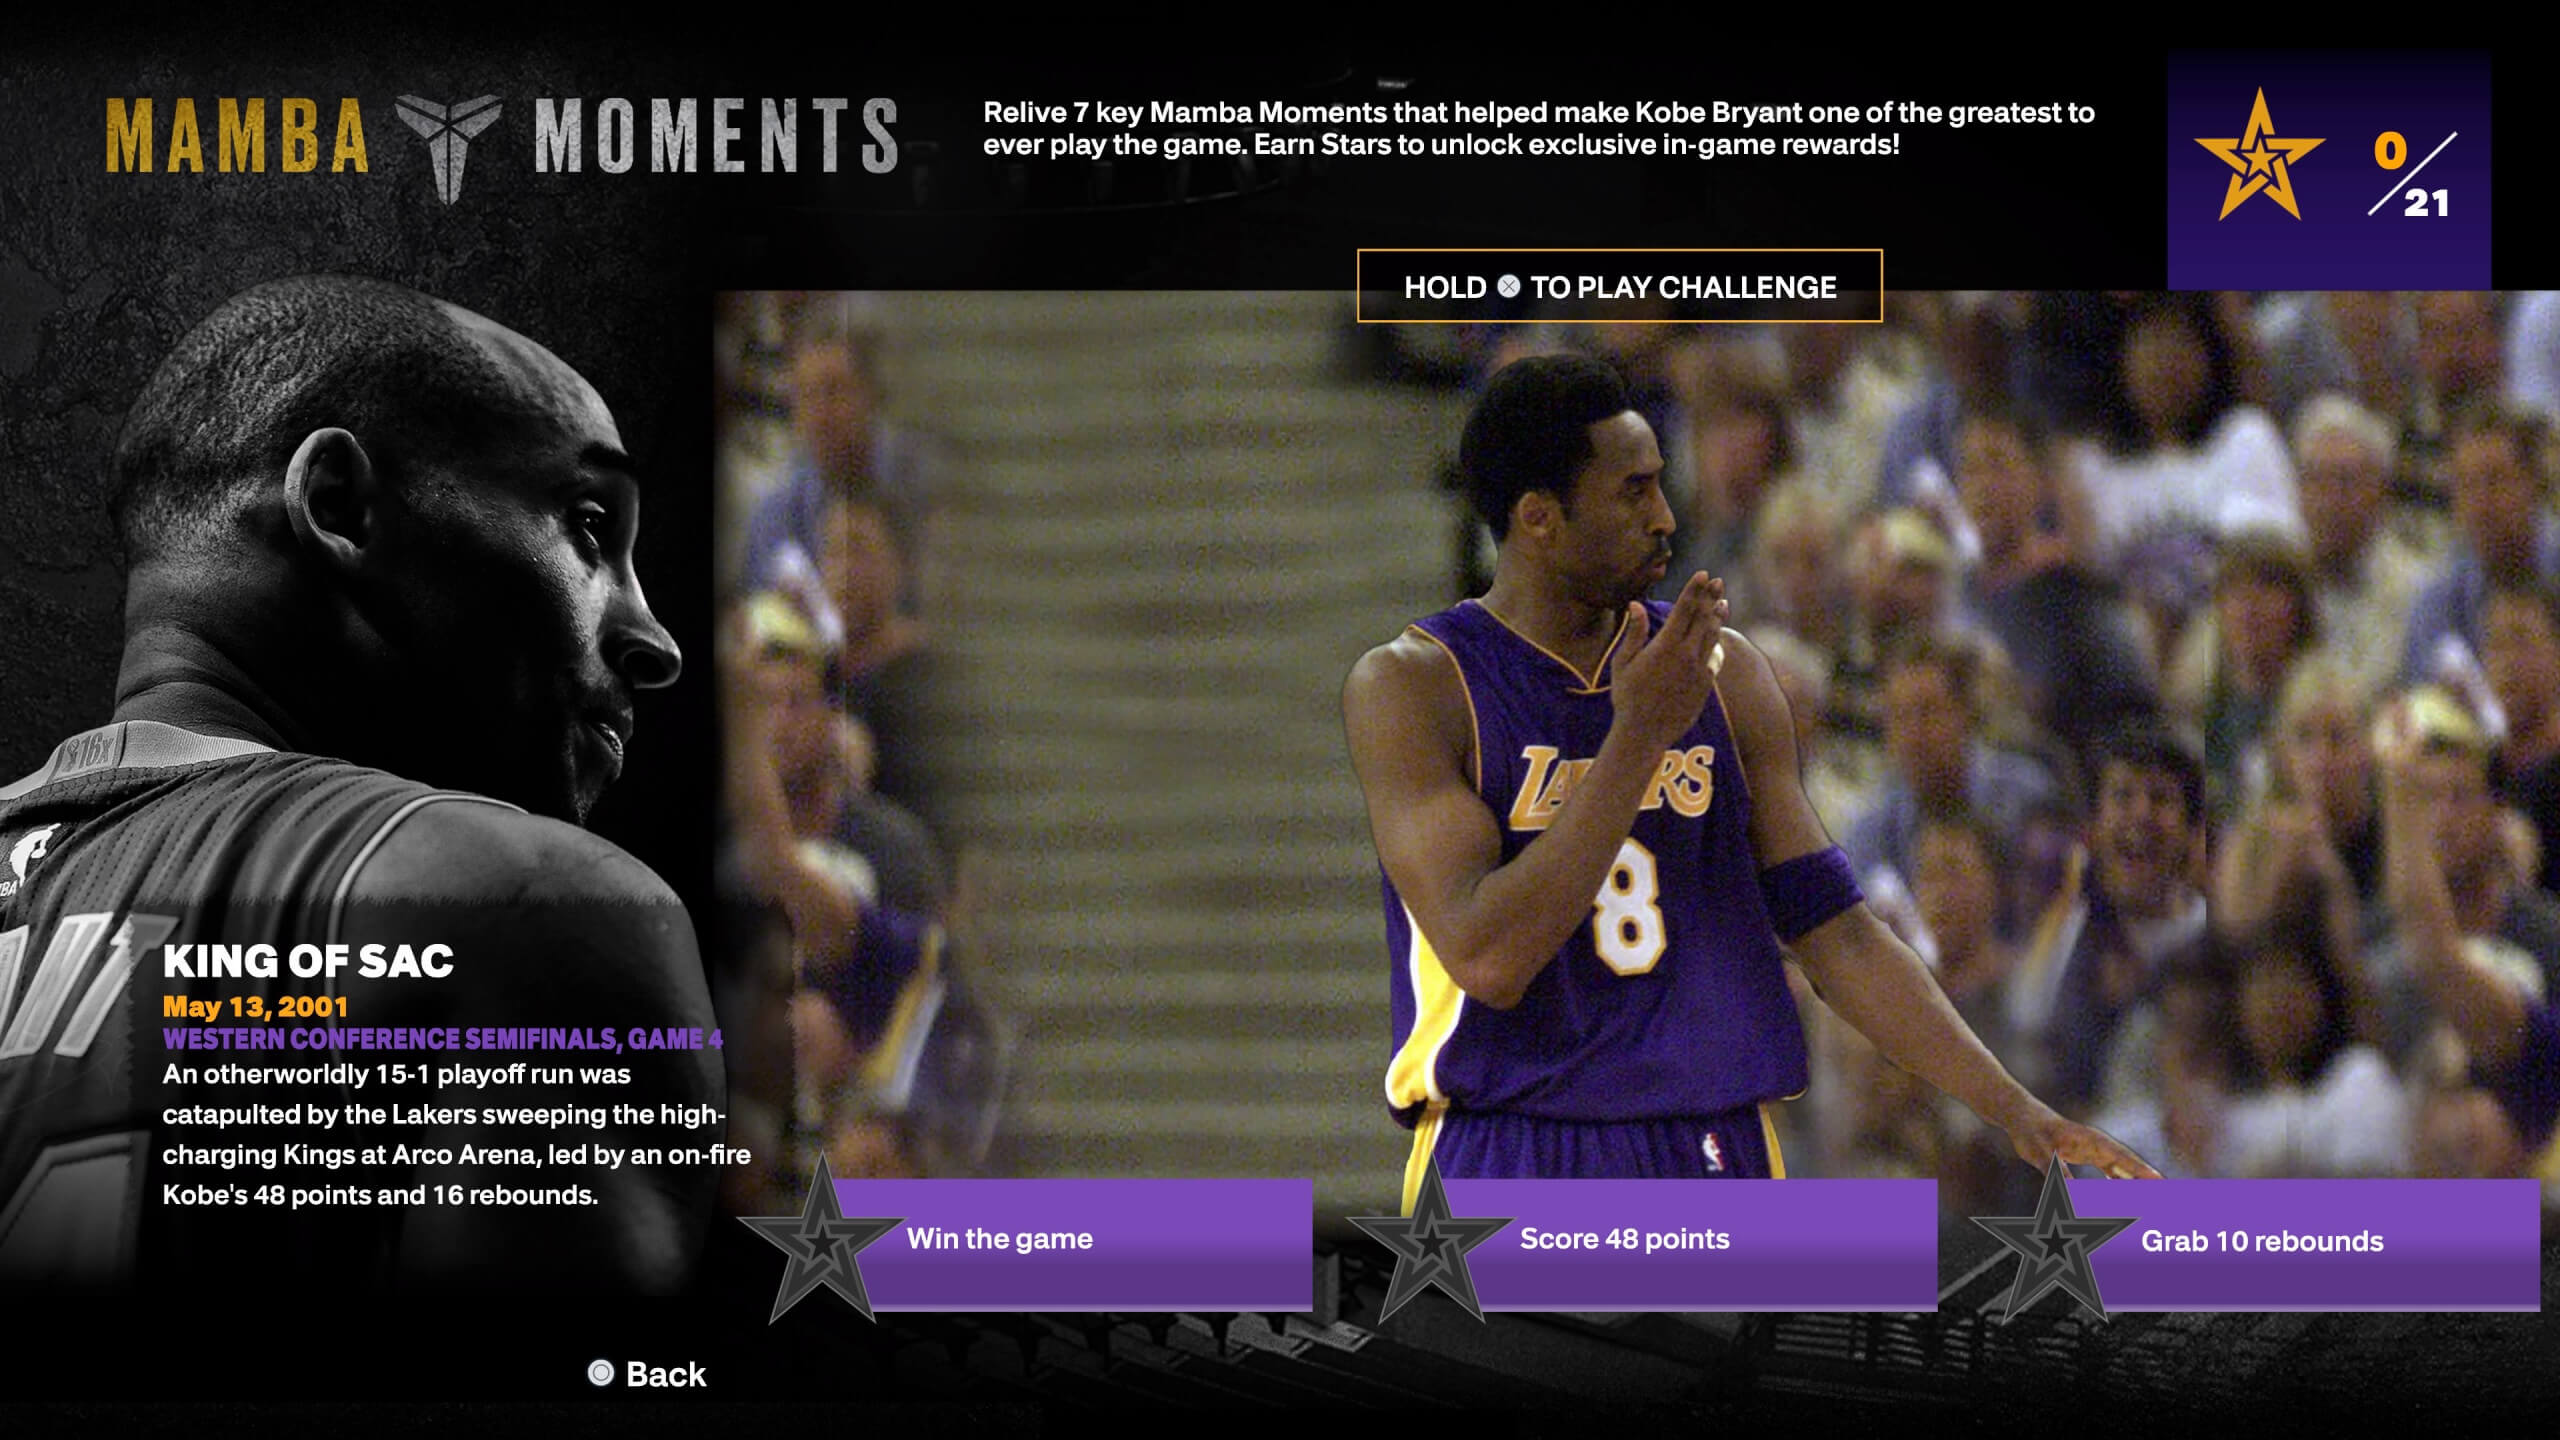 This is a picture of the game mode Mamba Moments - it shows the challenges at the bottom for this game